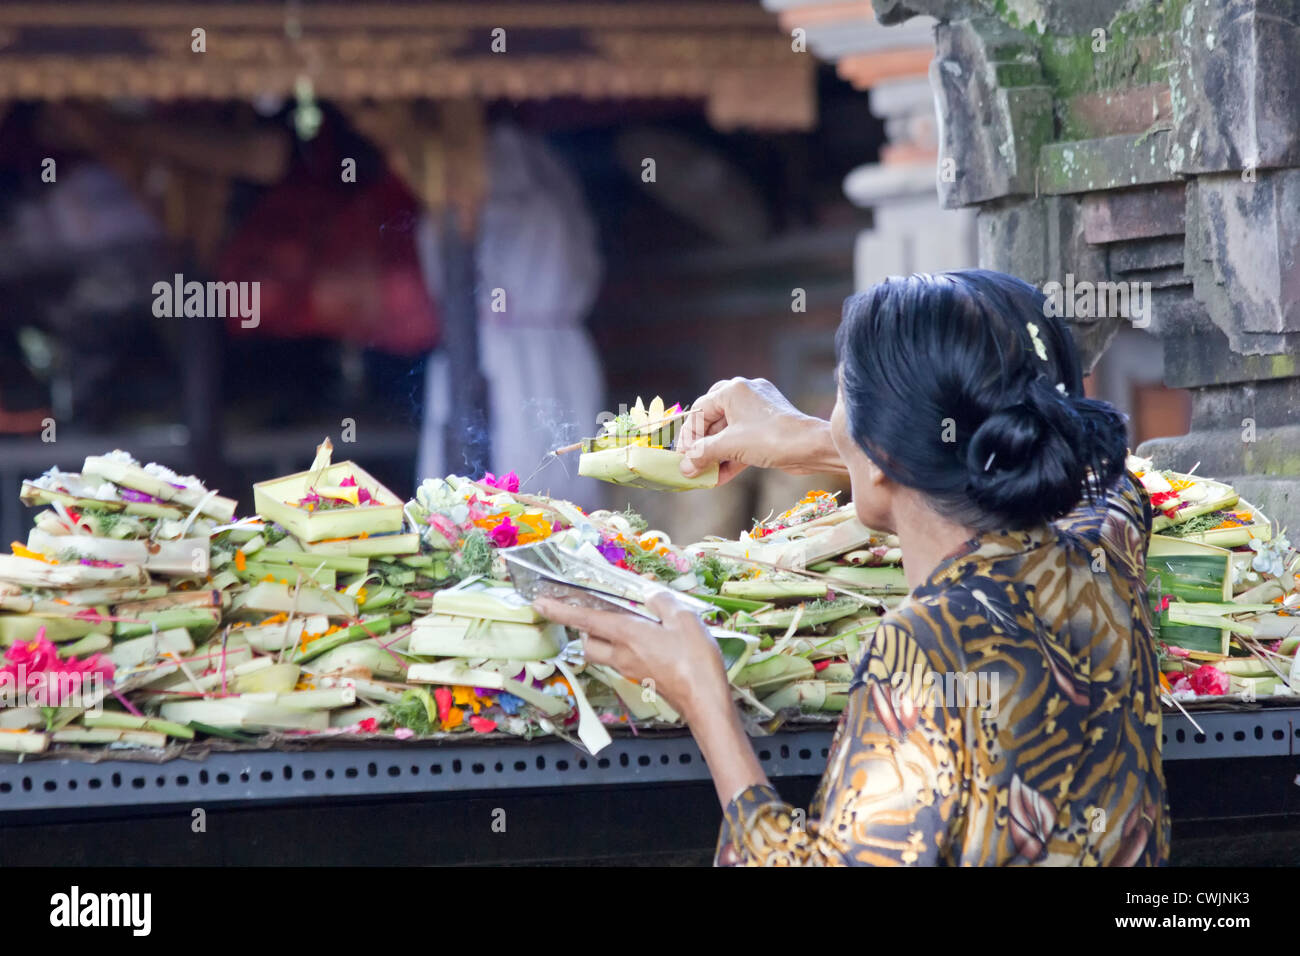 Woman placing offerings at temple, Denpasar, Bali, Indonesia Stock Photo